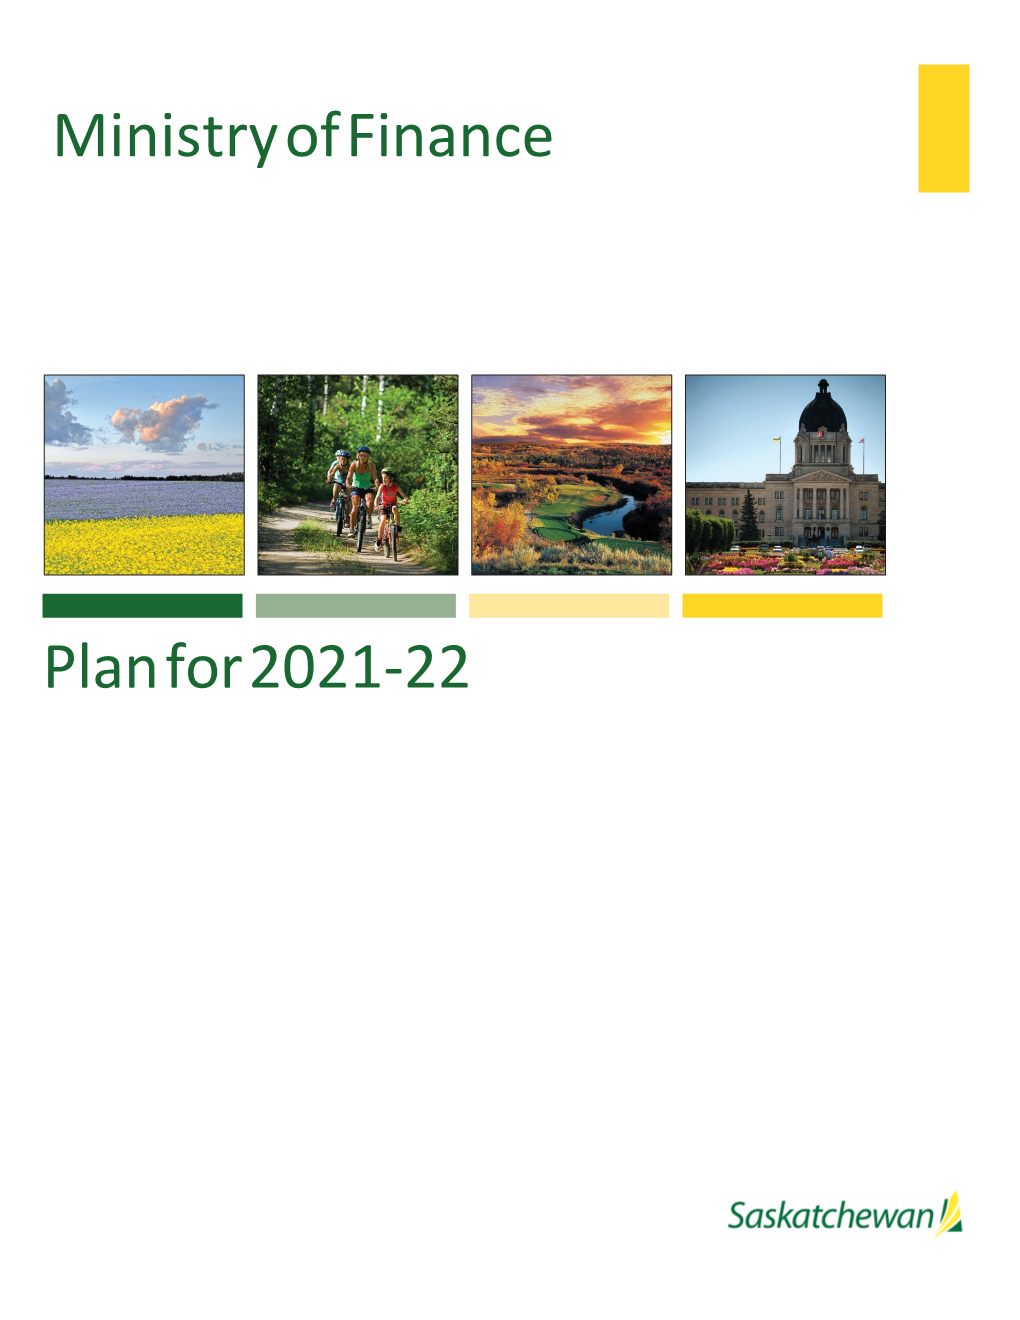 Ministry Plans for 2021-22